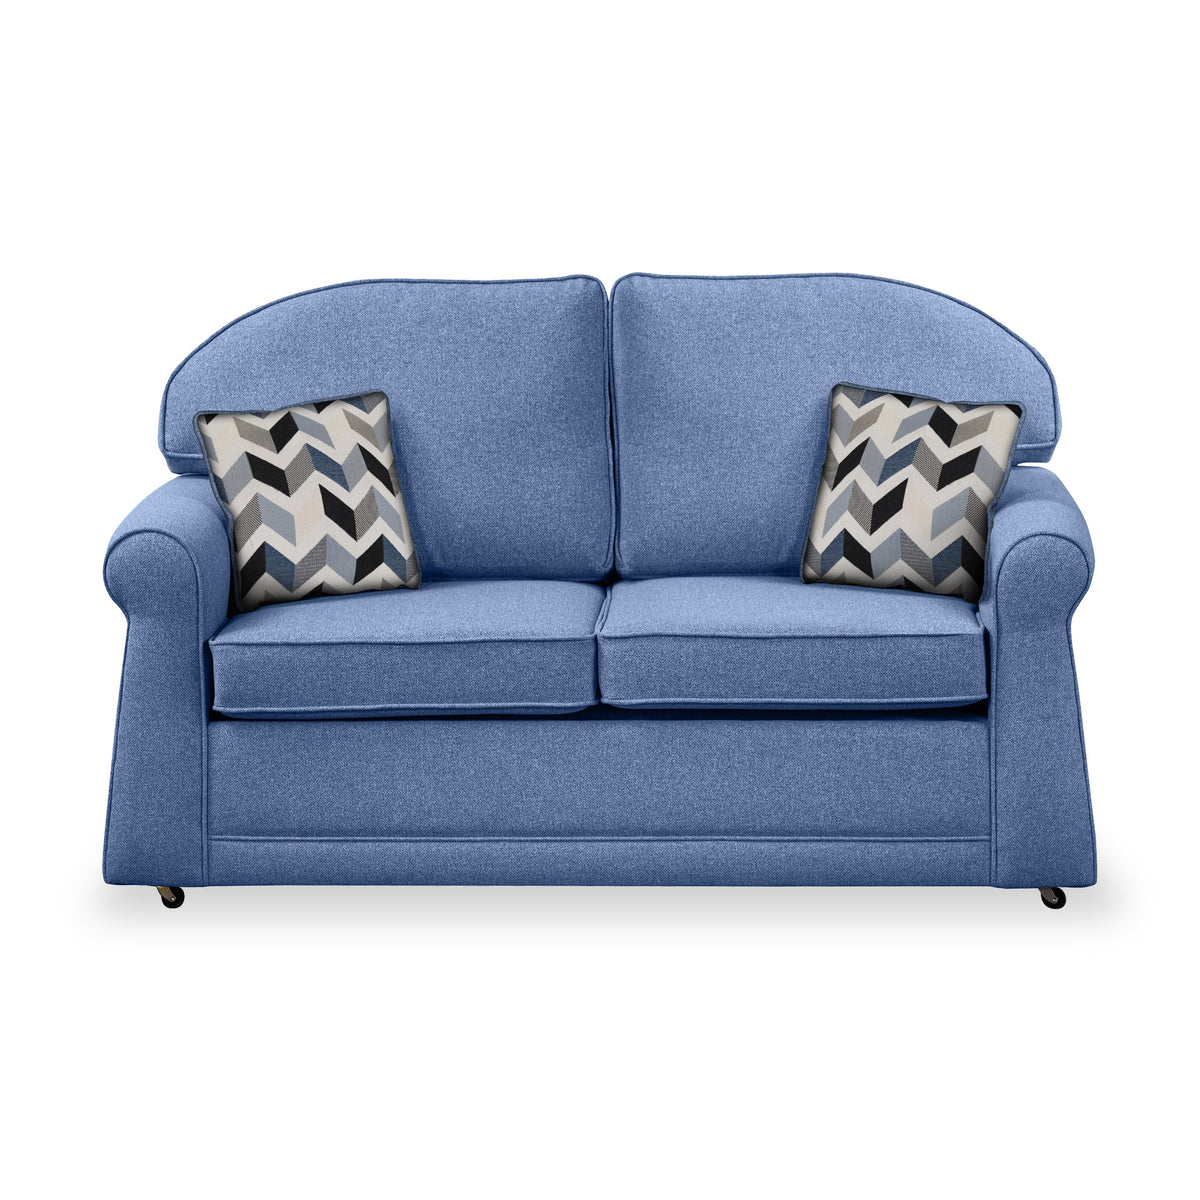 Croxdon Denim Faux Linen 2 Seater Sofabed with Denim Scatter Cushions from Roseland Furniture